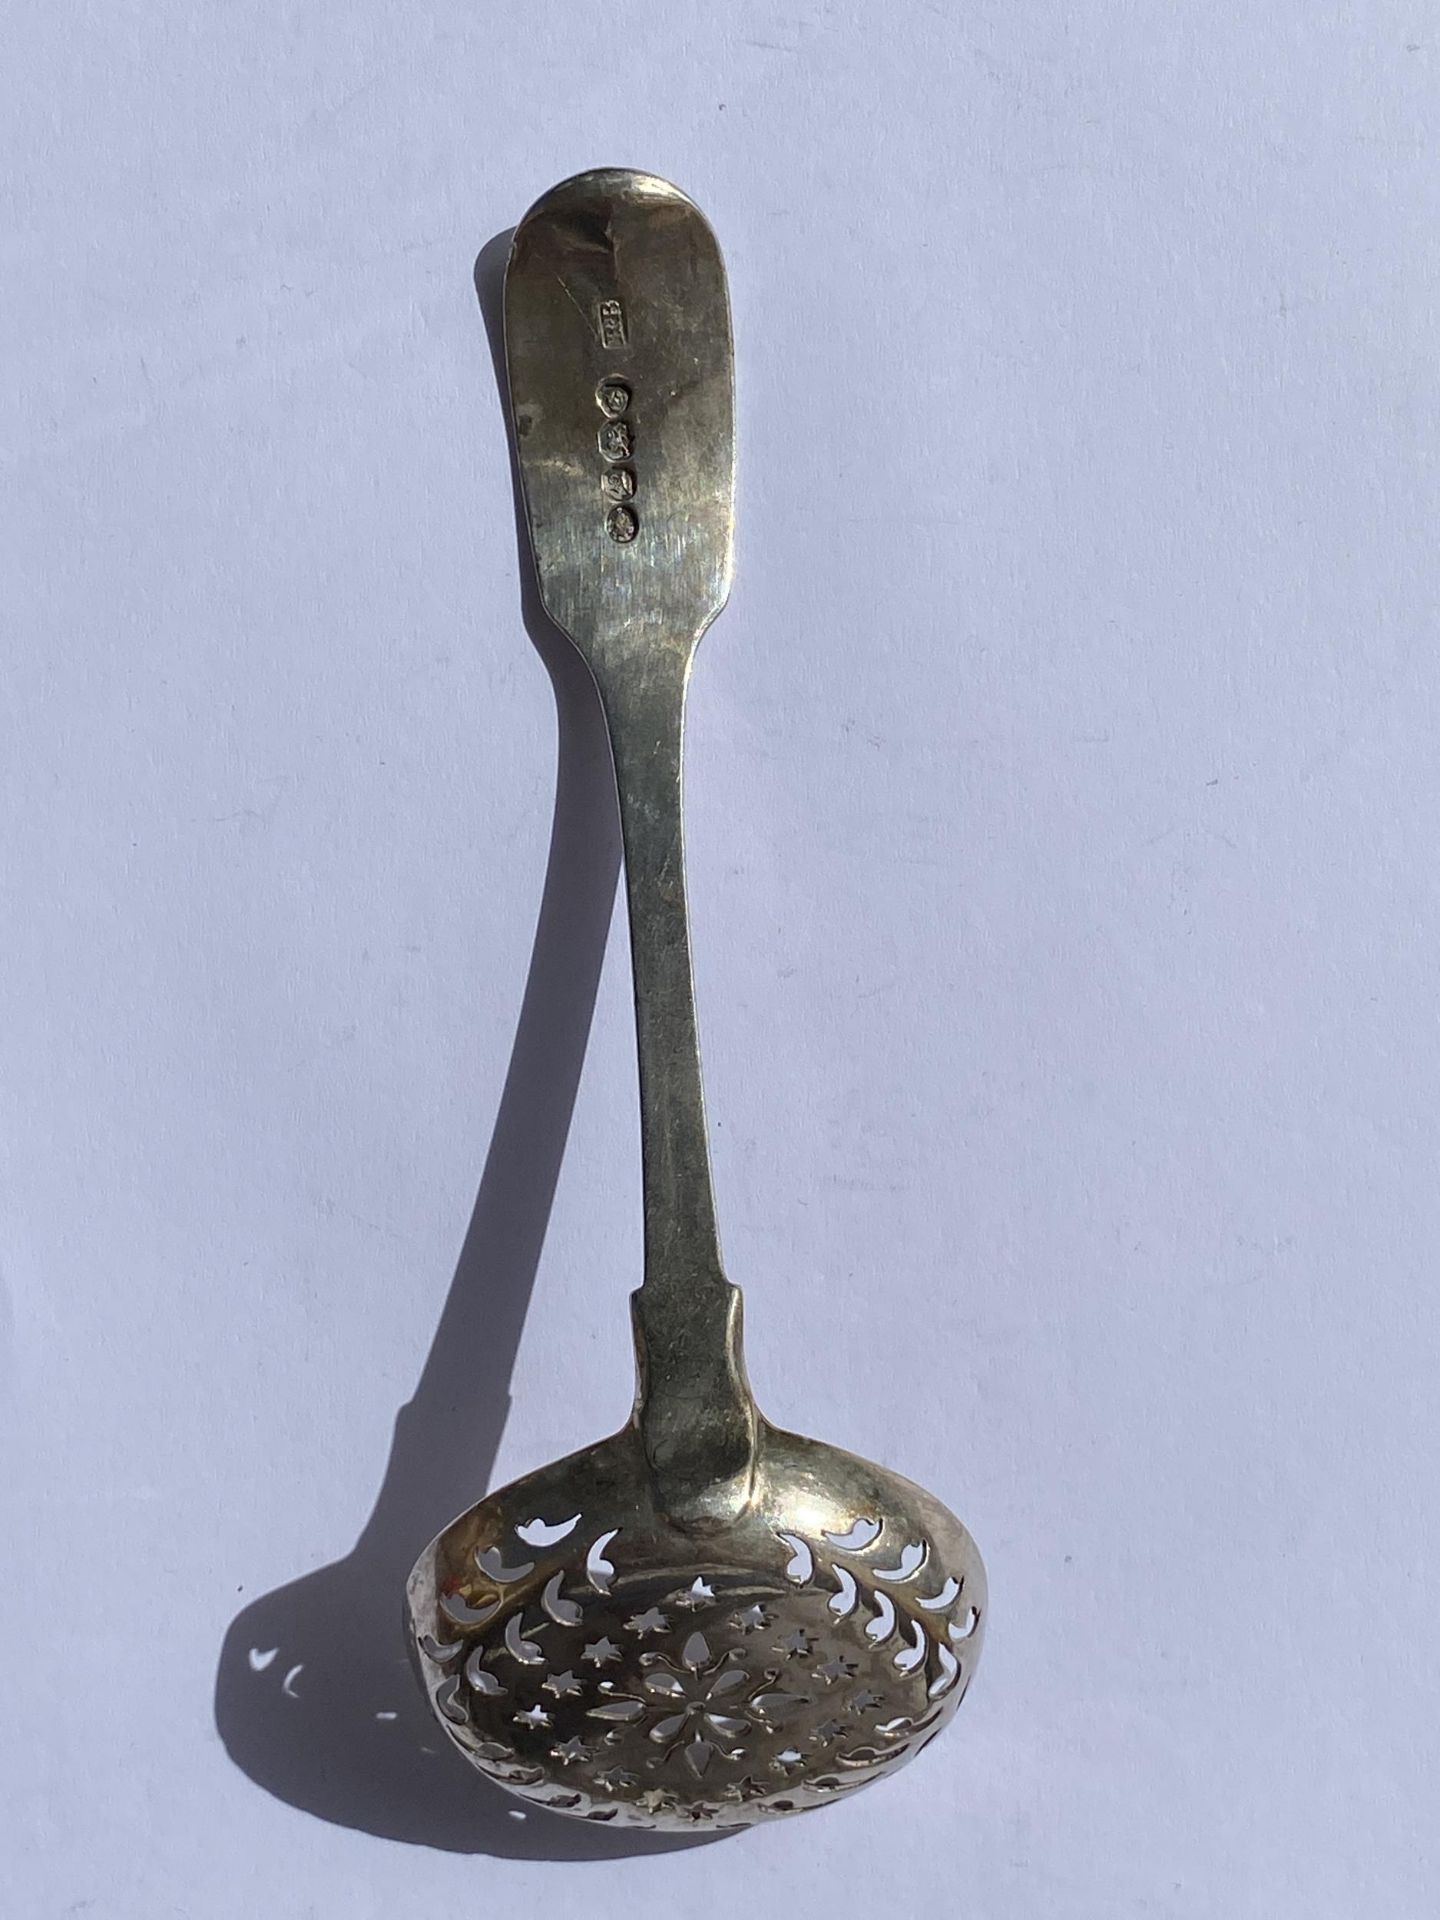 A WILLIAM IV 1836 HALLMARKED LONDON SILVER SUGAR SIFTER, MAKER RICHARD BRITTON, LENGTH 15 CM, WEIGHT - Image 3 of 4